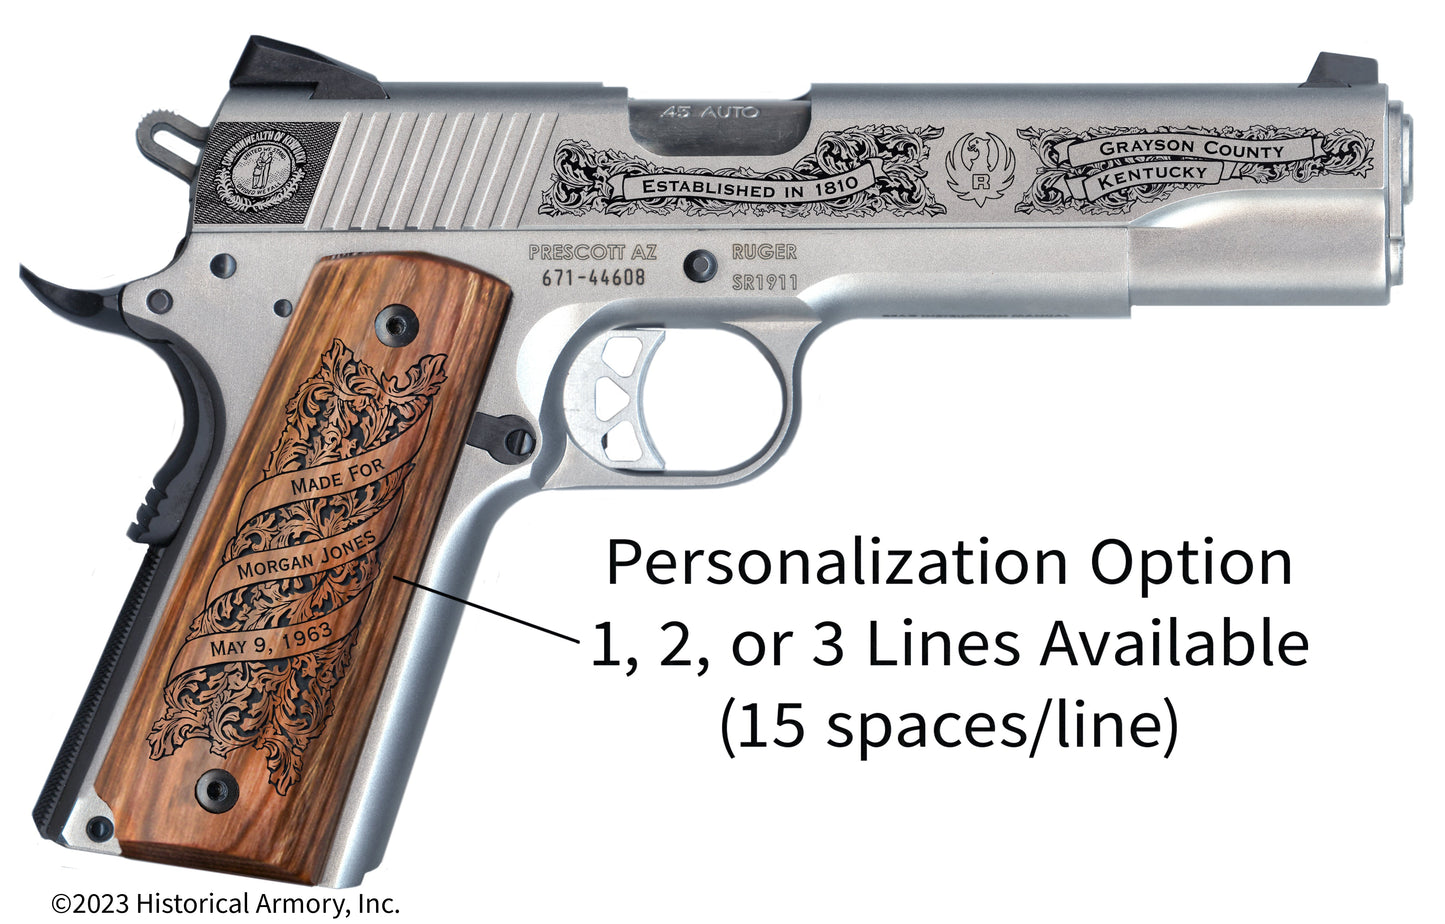 Grayson County Kentucky Personalized Engraved .45 Auto Ruger 1911